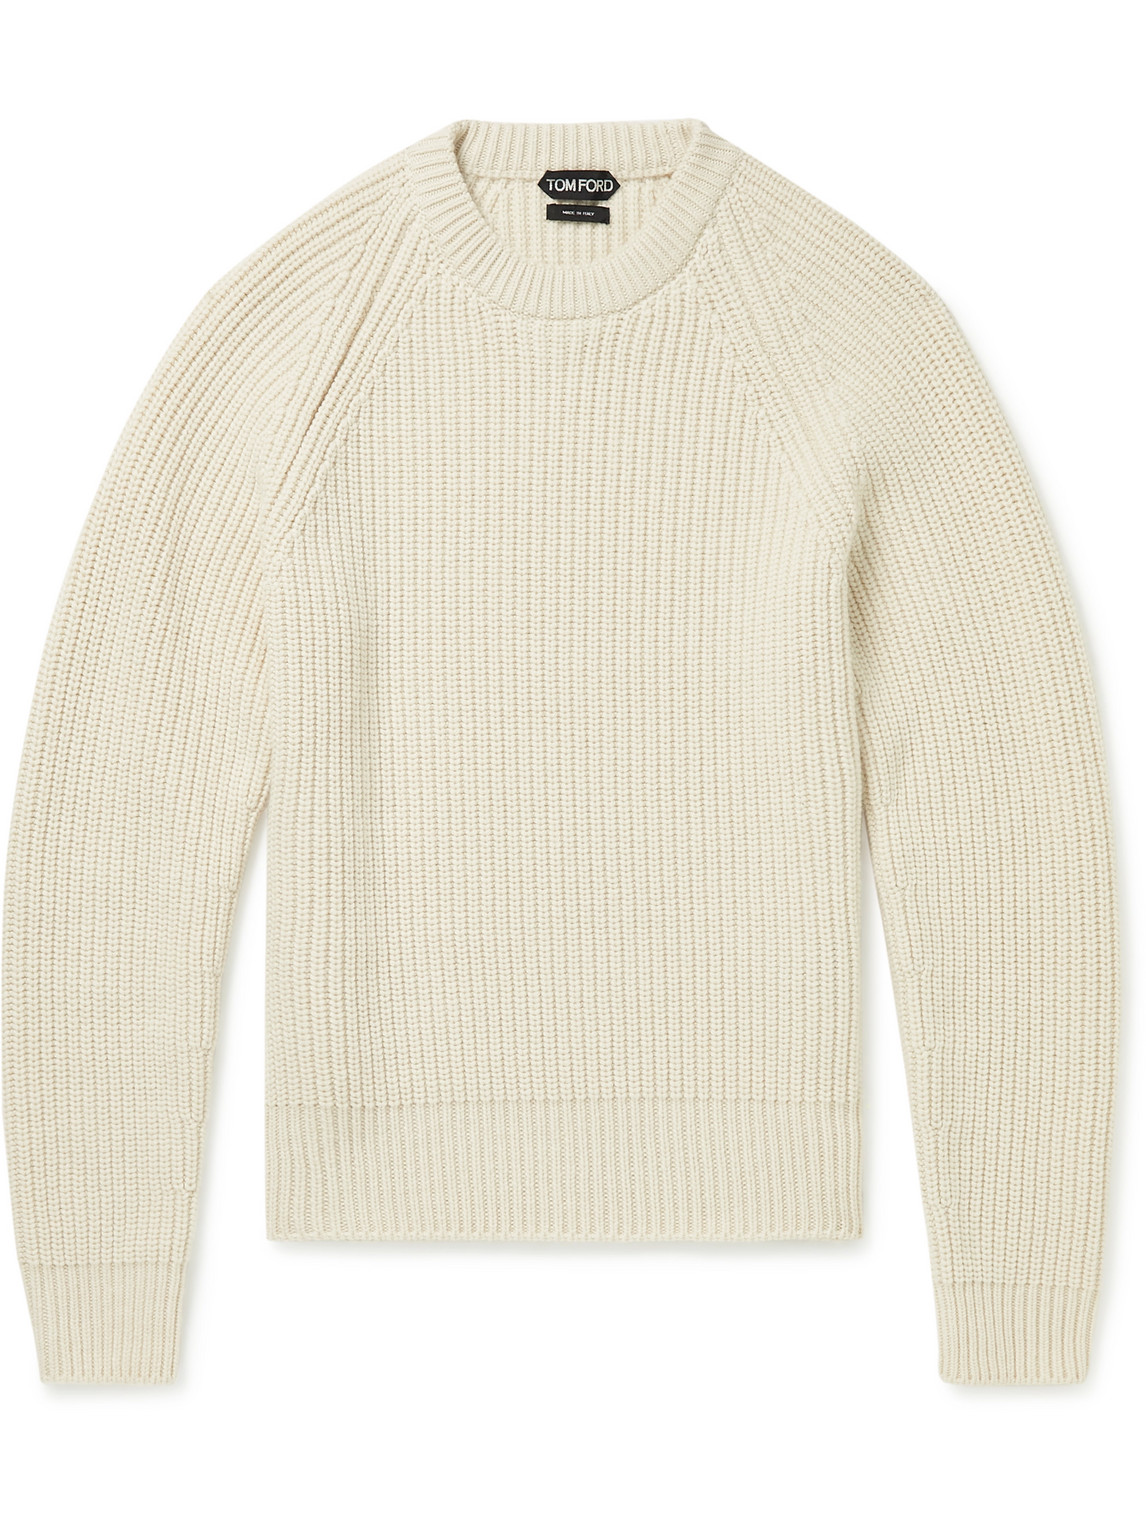 TOM FORD RIBBED CASHMERE MOCK-NECK SWEATER